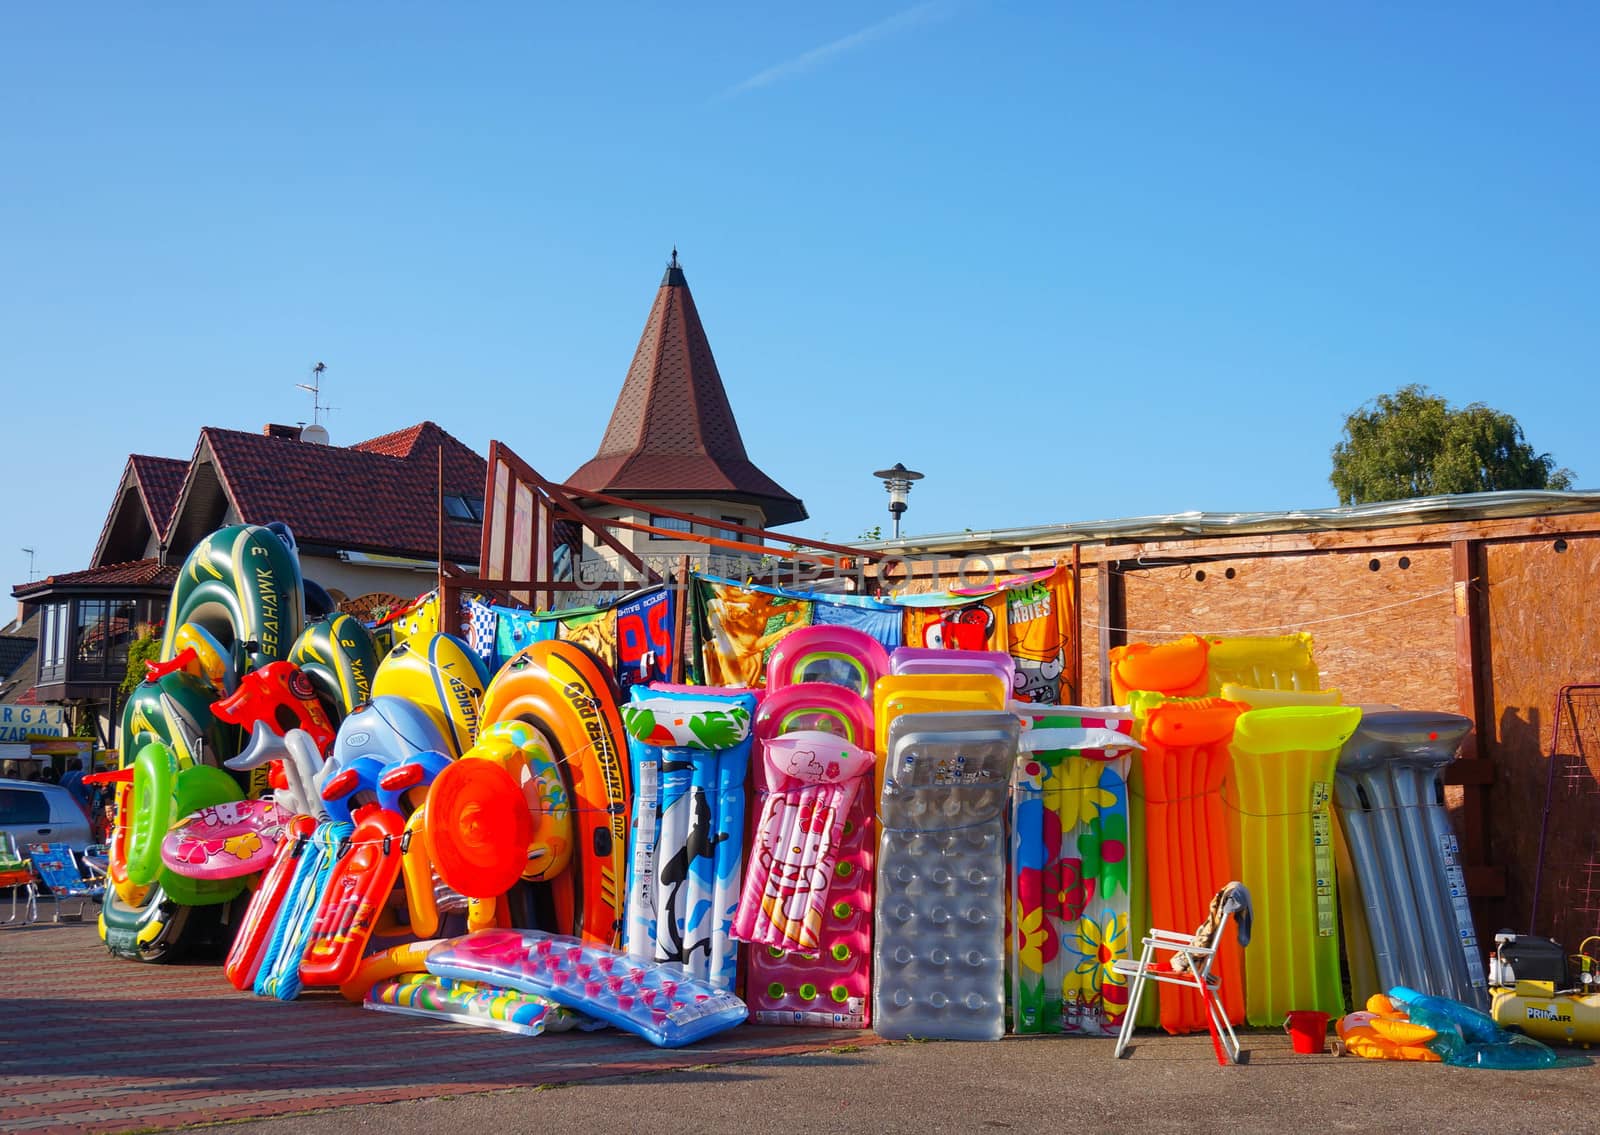 SIANOZETY, POLAND - JULY 18, 2015: Beach toys for sale in front of a store